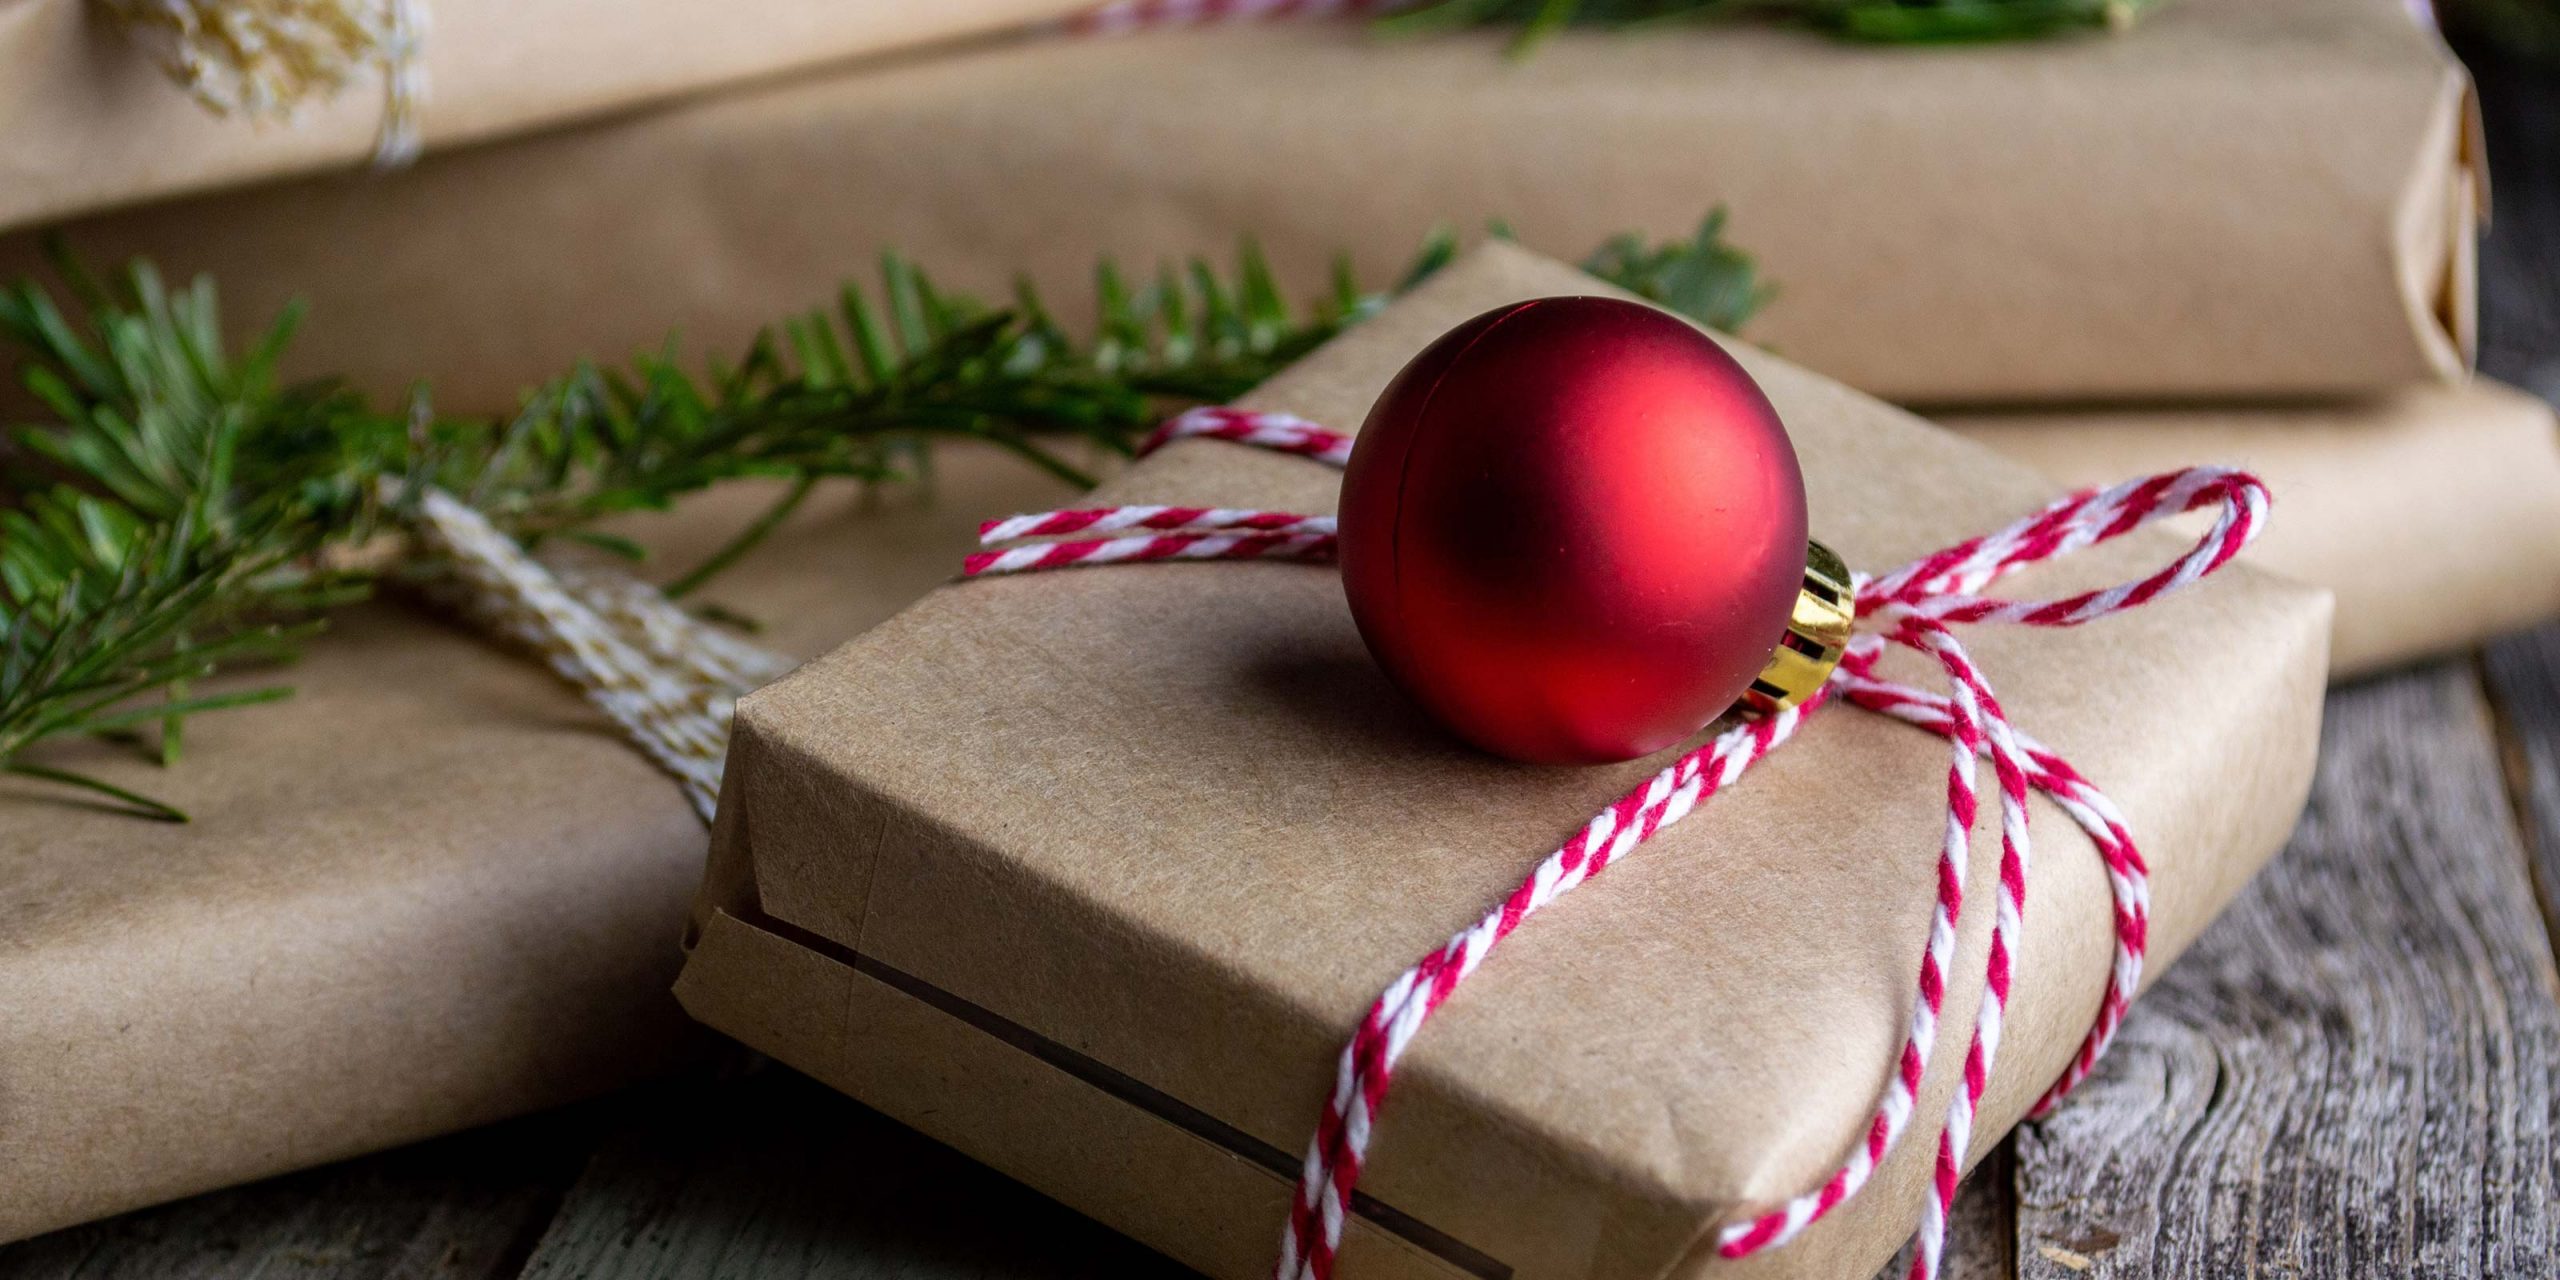 holiday gifts wrapped under a tree with a red ornament on top